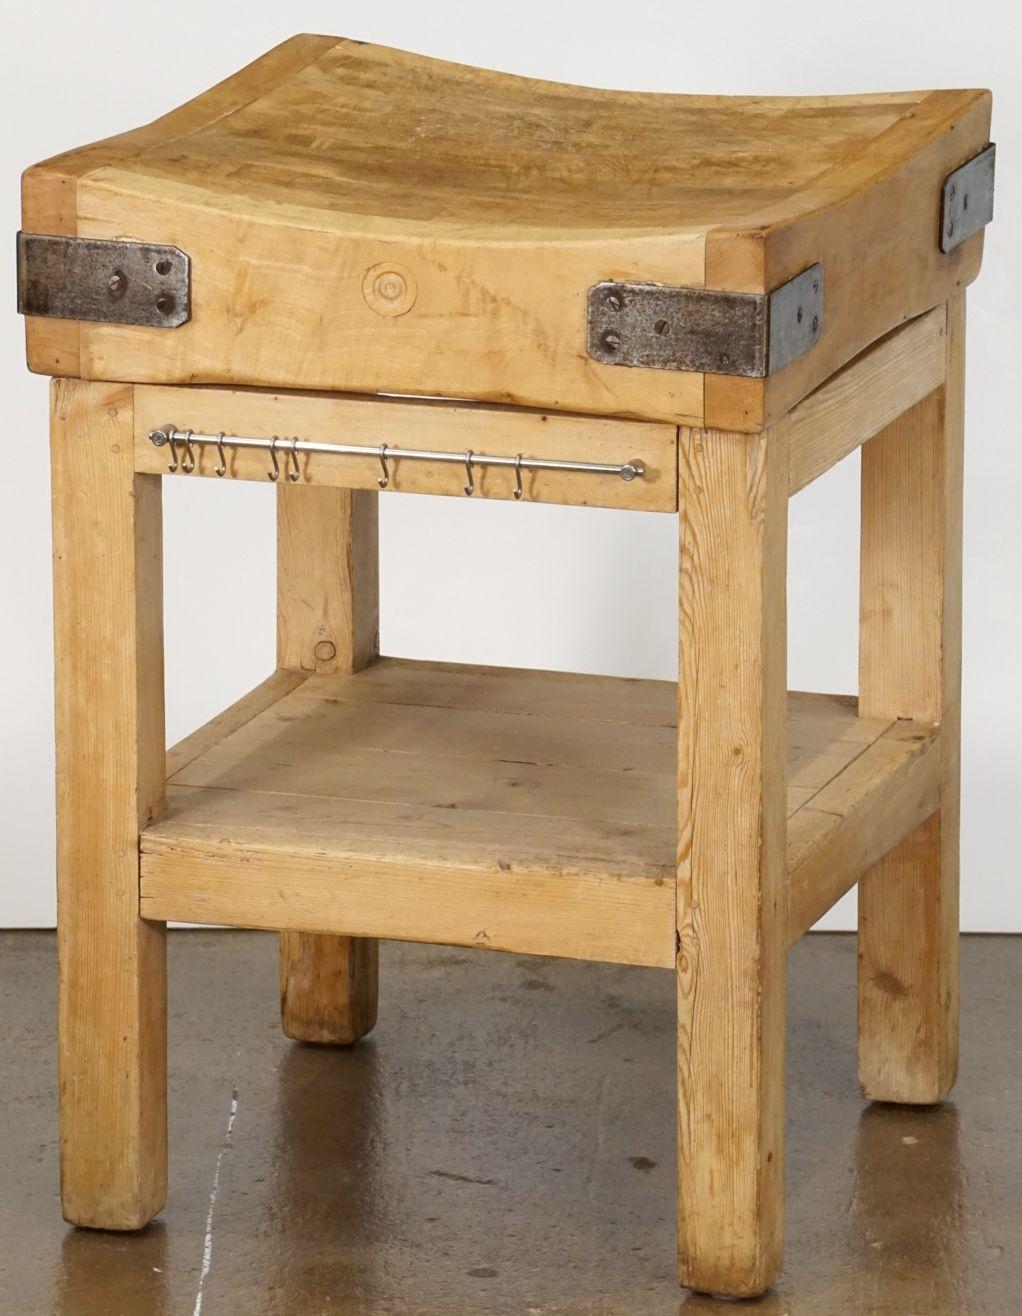 A handsome two-tiered butcher's chopping block on stand or table of pine and beech wood from England, featuring a large, square sloping block or slab of iron-bound wood set upon a sturdy bottom tier four-legged support stand of pine, with paneled